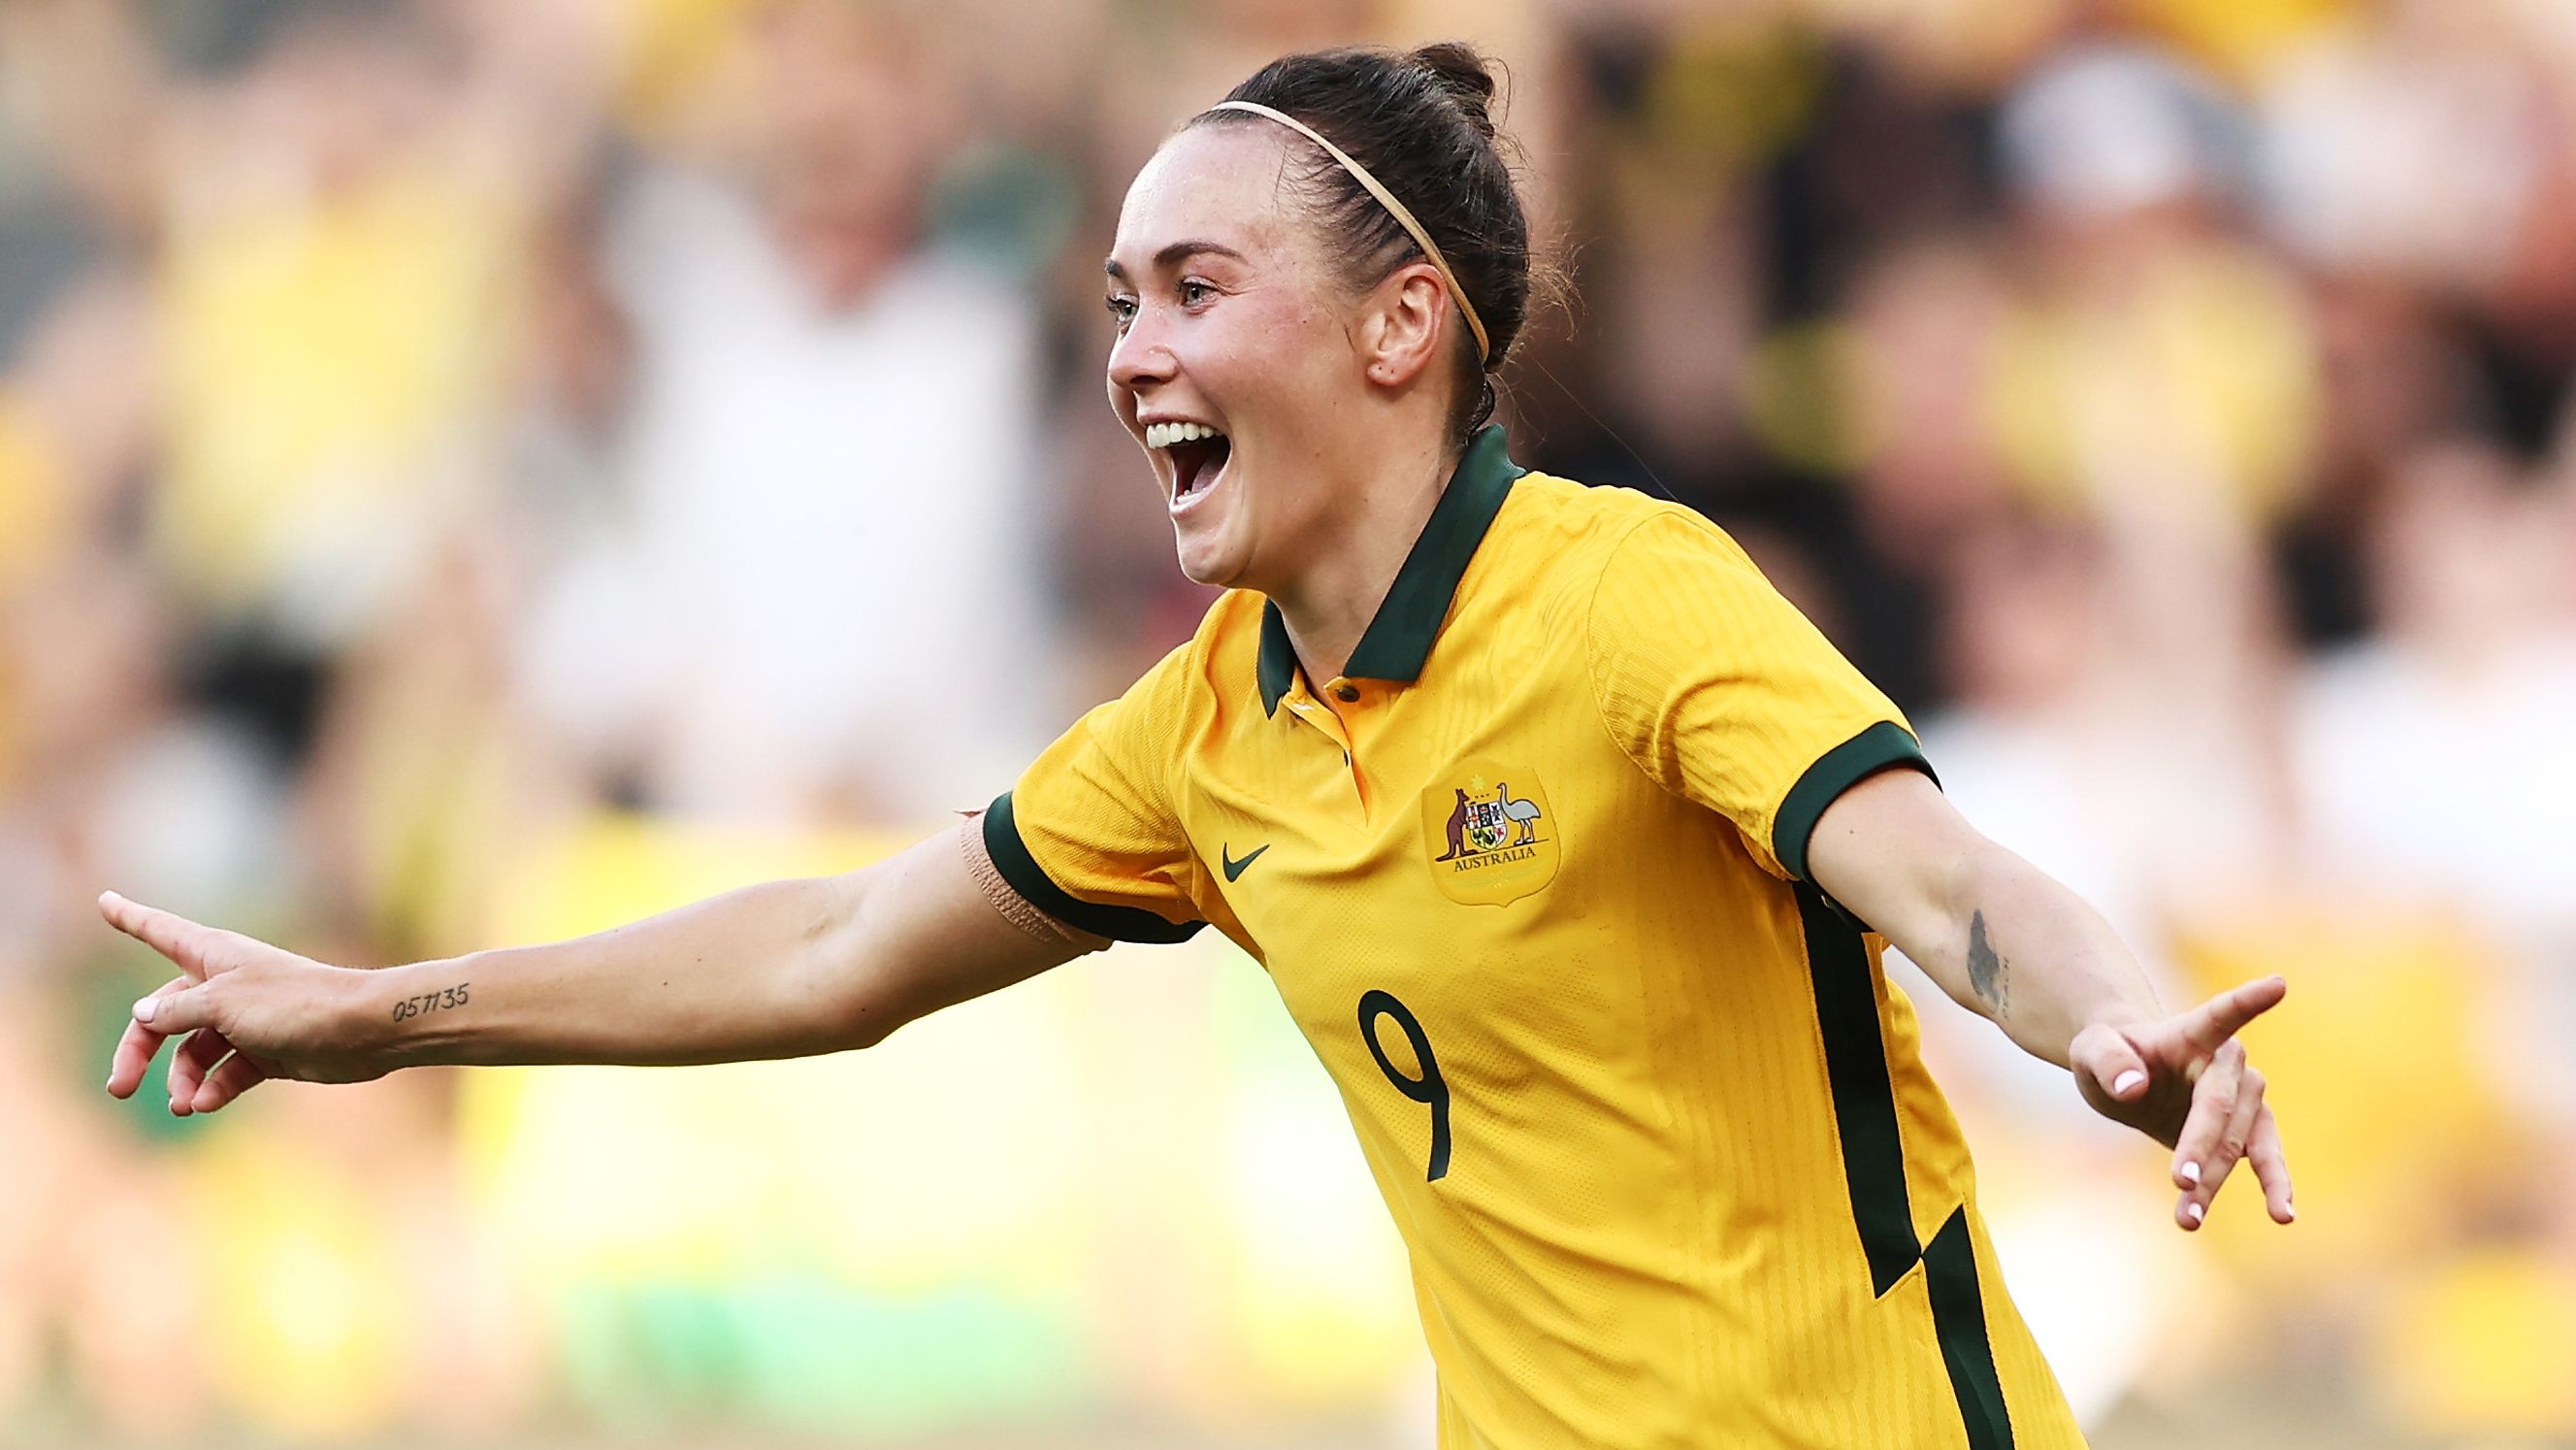 SYDNEY, AUSTRALIA - FEBRUARY 19: Caitlin Foord of Australia celebrates scoring a goal during the 2023 Cup of Nations Match between Australian Matildas and Spain at CommBank Stadium on February 19, 2023 in Sydney, Australia. (Photo by Matt King/Getty Images)